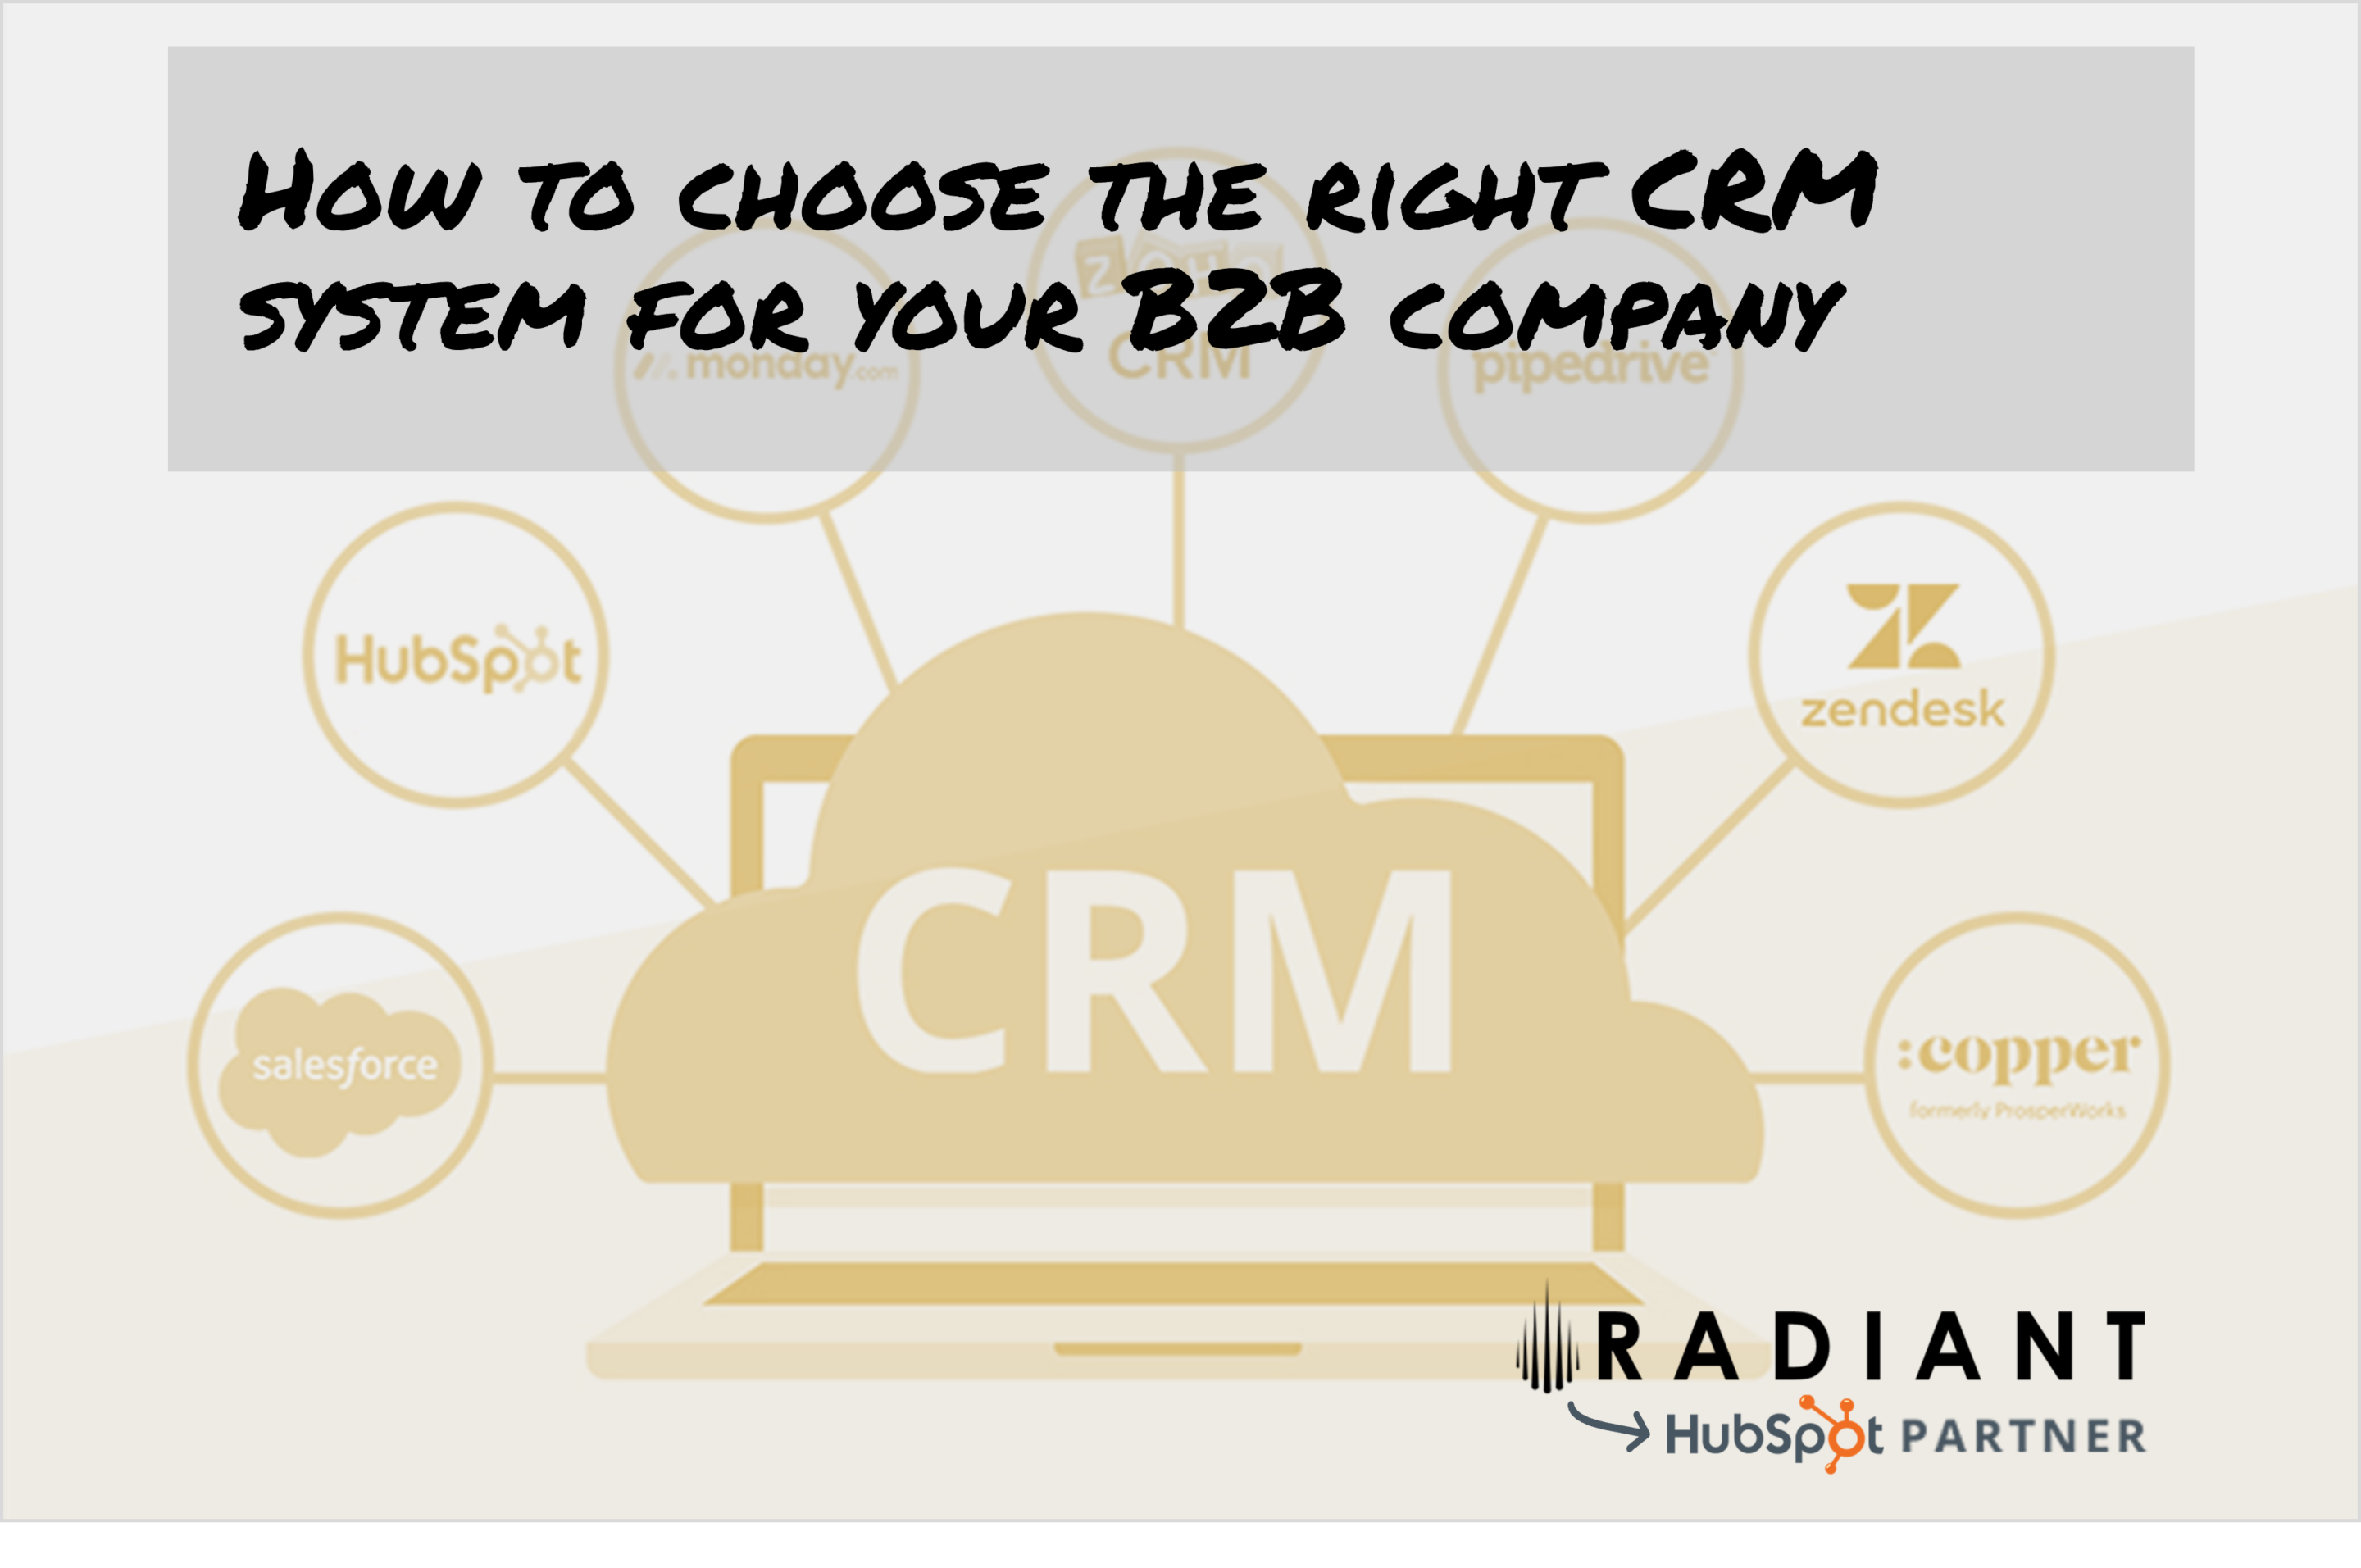 How to choose the right CRM system for your B2B company. But should it be HubSpot or Salesforce?